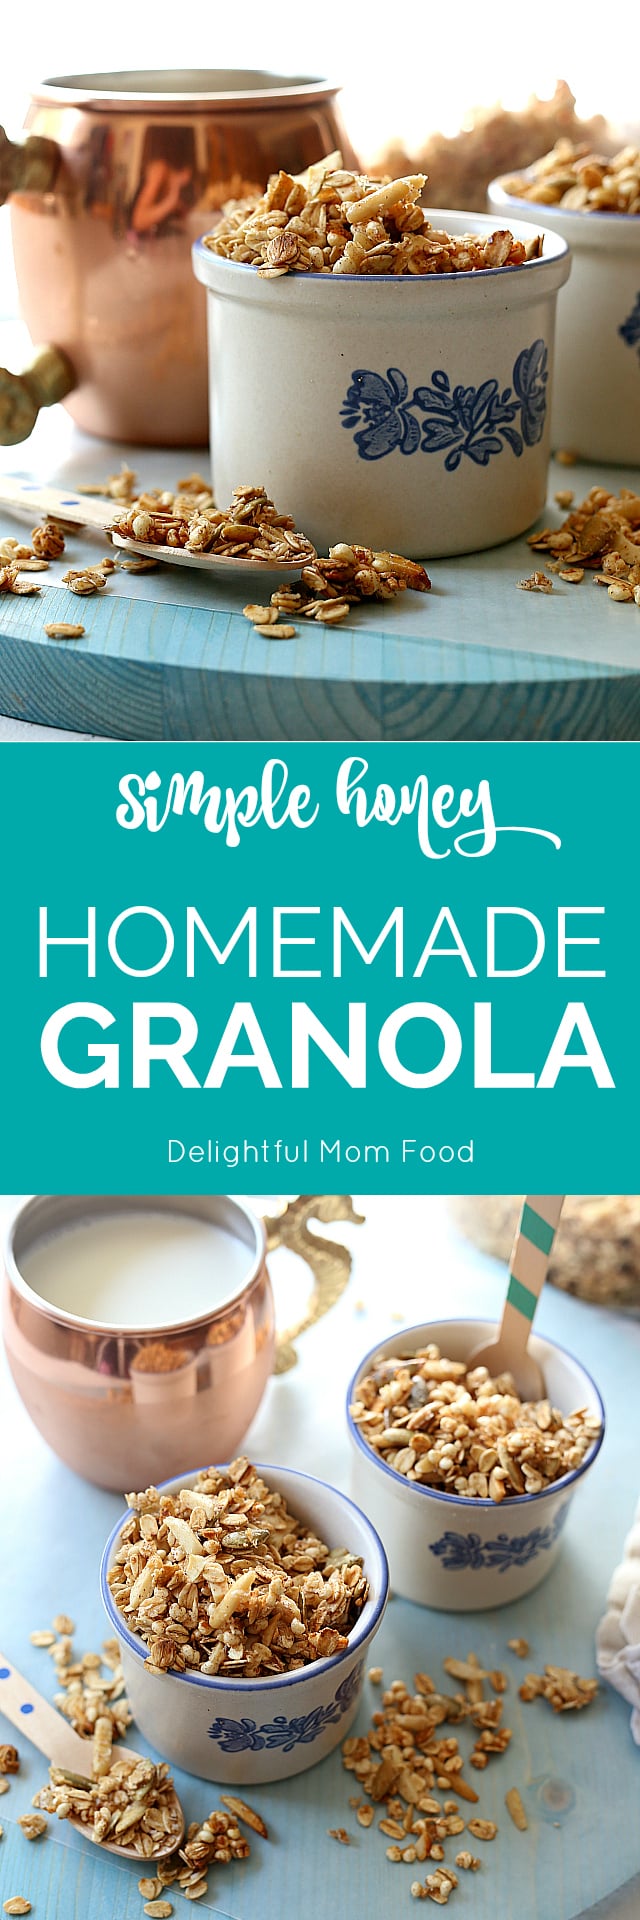 Gluten-Free Homemade honey granola recipe is a great way to start the day! This toasted oats recipe makes a big batch so you can use half of it to turn into no bake granola bars for snack time or breakfast the next day! | Delightful Mom Food